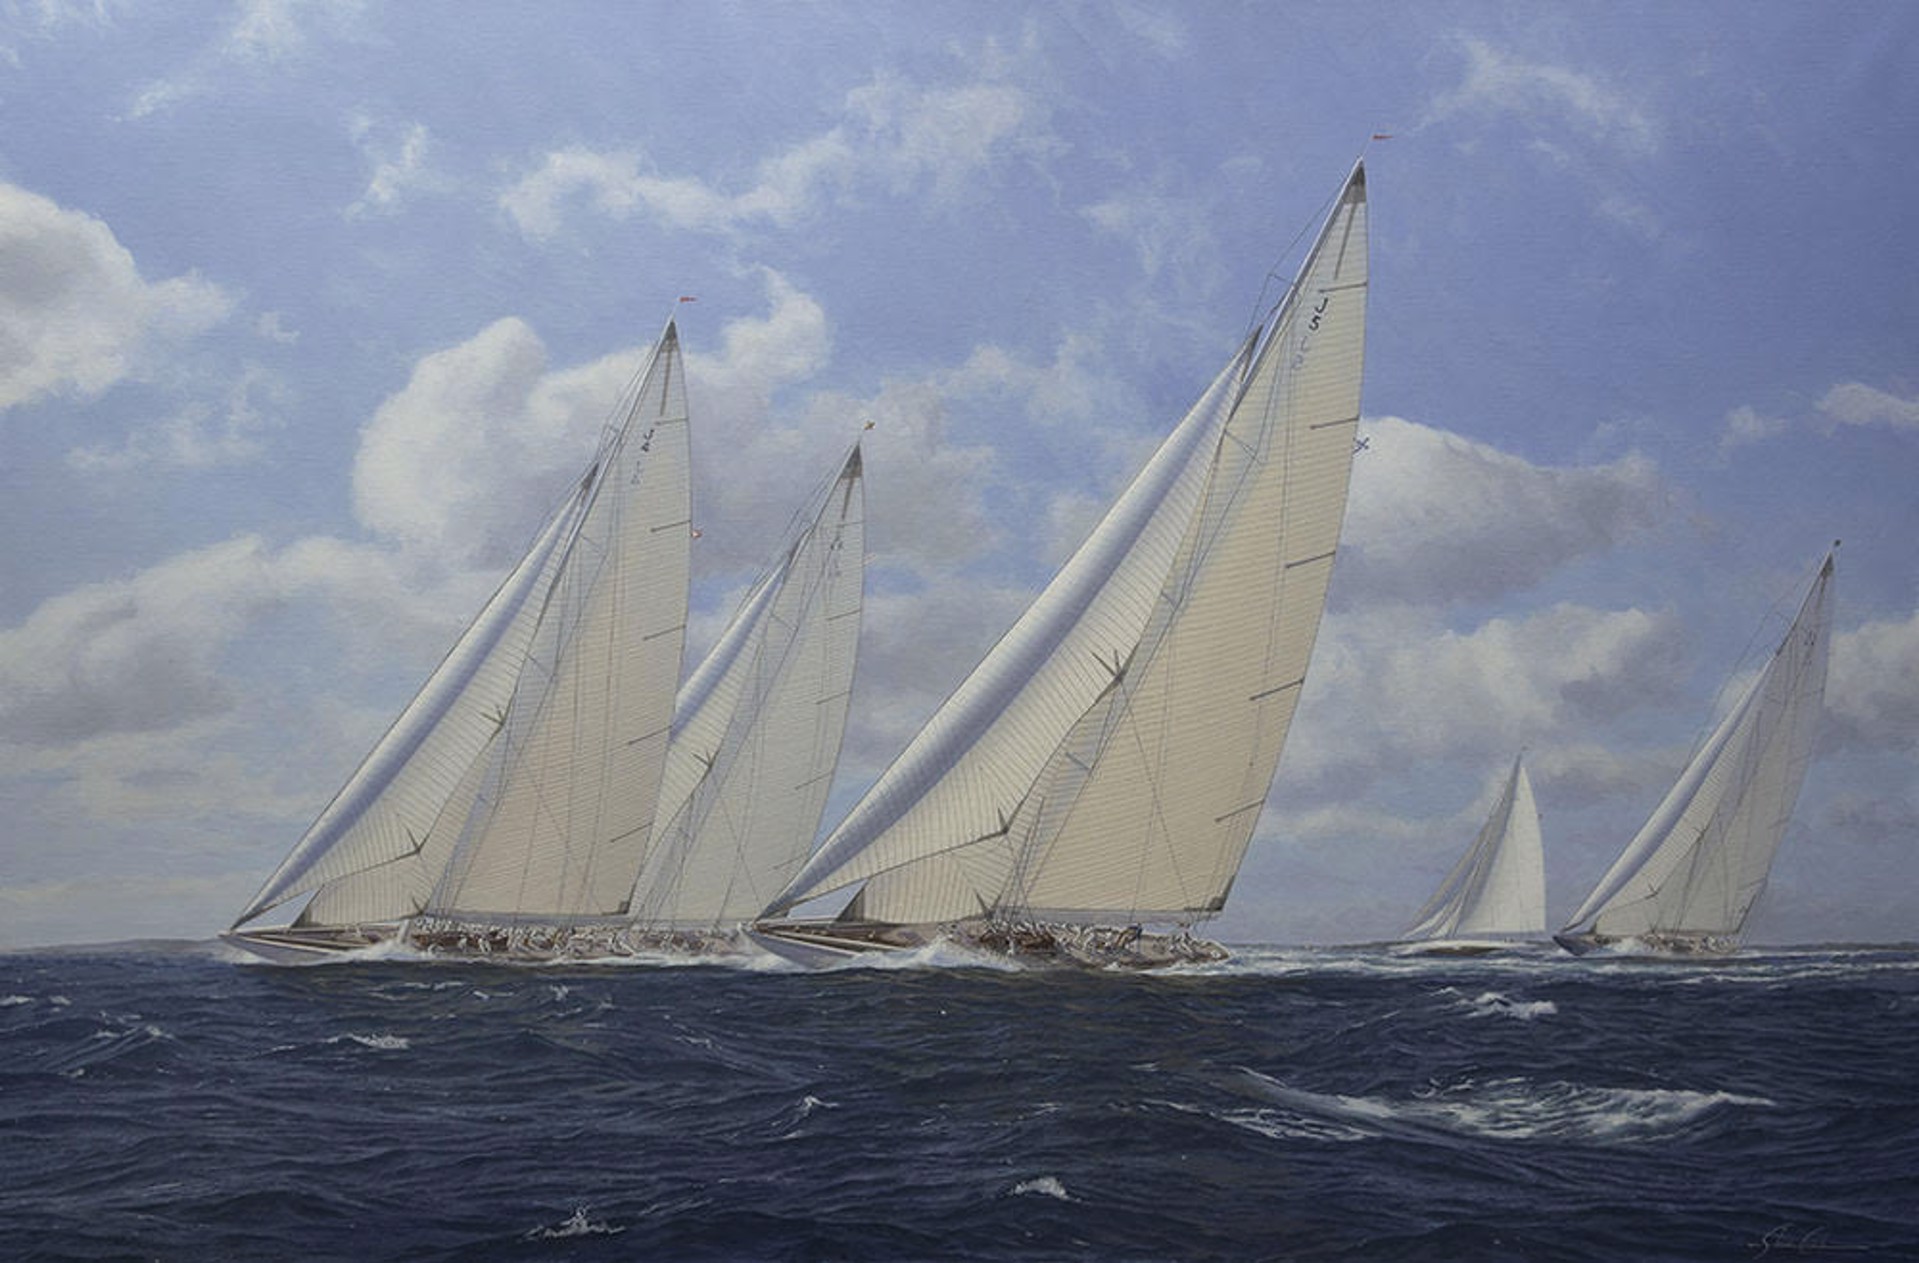 A Close Start. New York Yacht Club Run August 20th Buzzards Bay by Shane Michael Couch